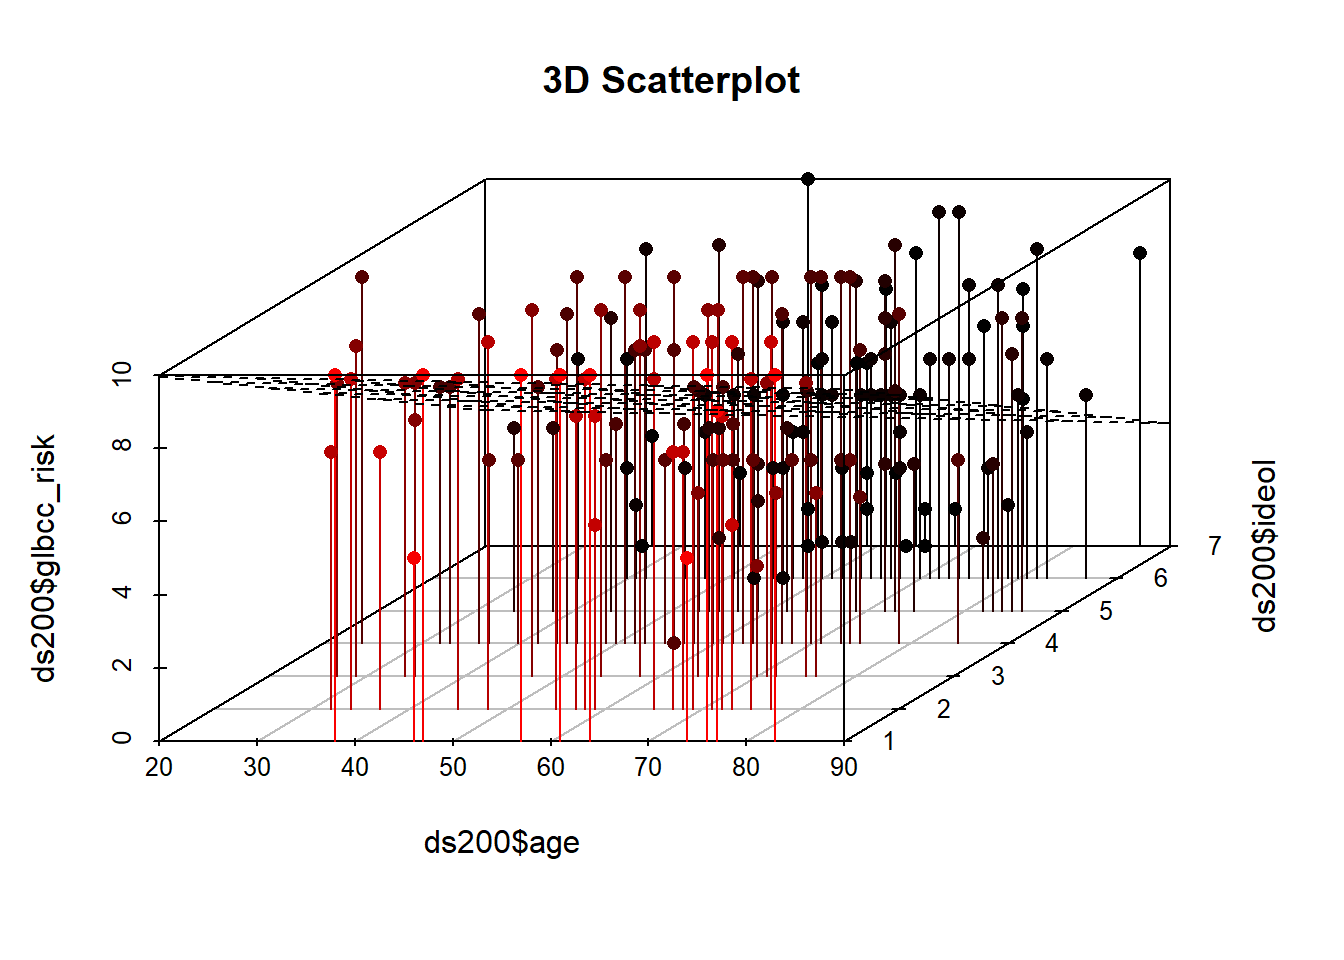 Scatterplot and Regression Plane of gcc risk, age, and ideology